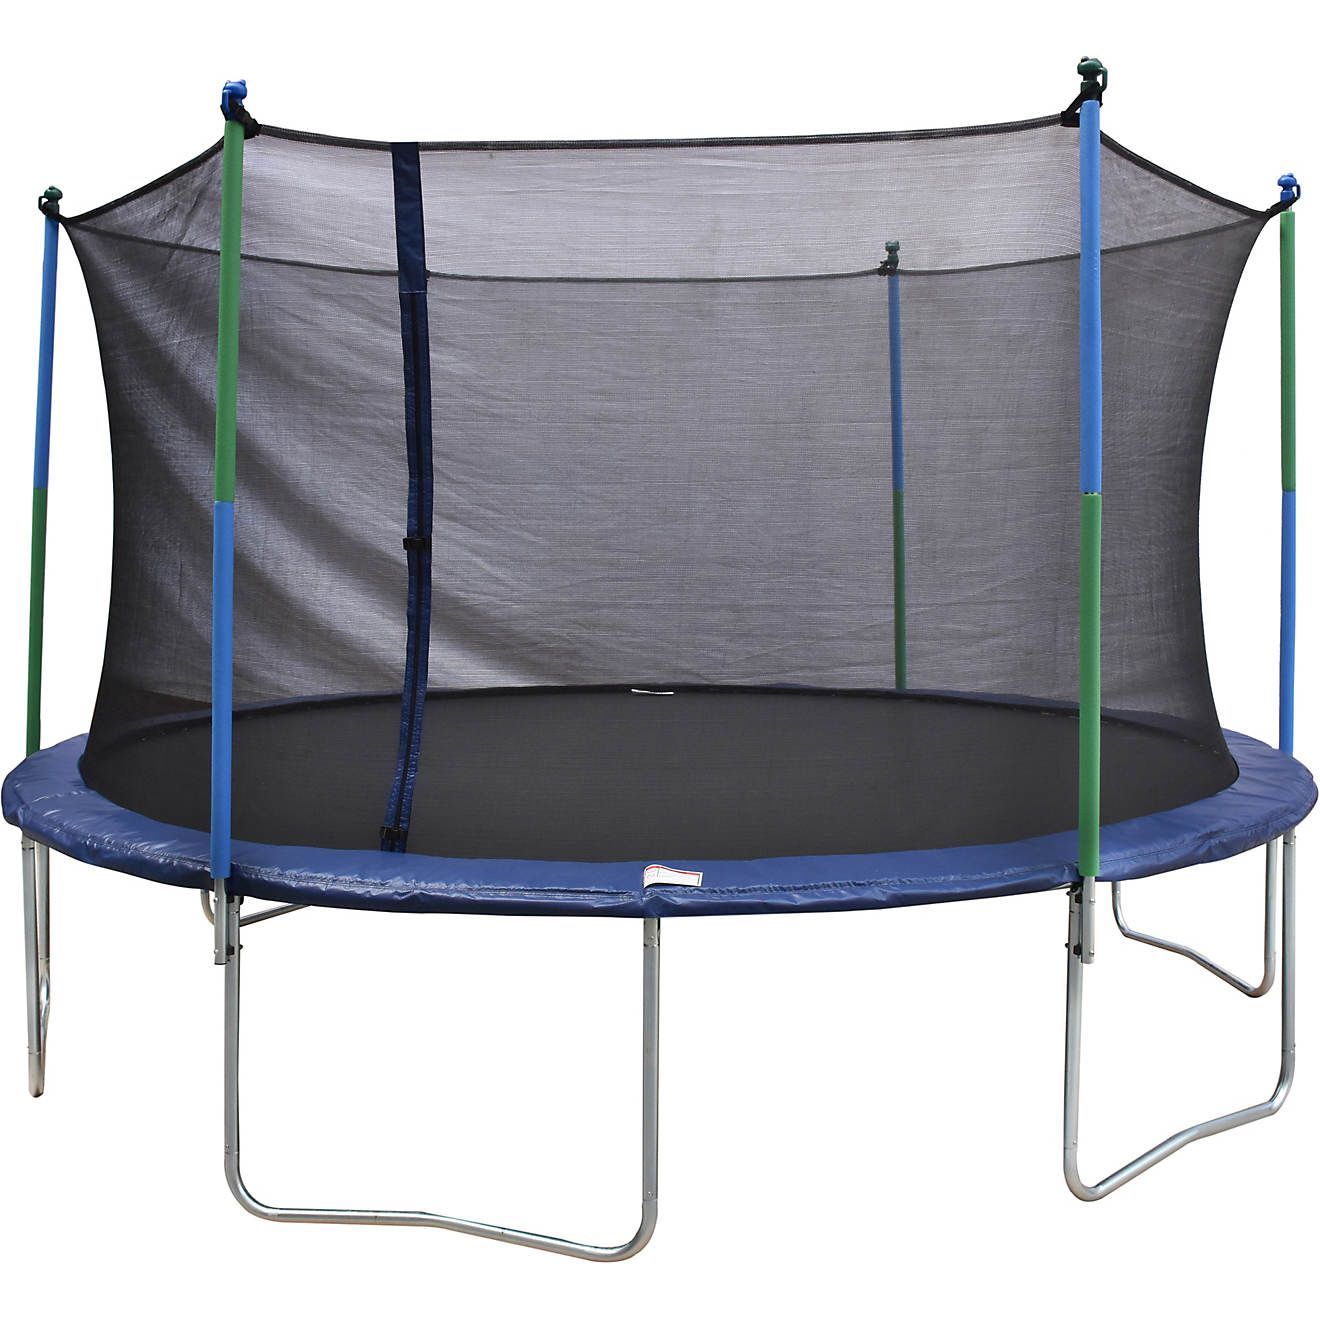 Crowntec 14 ft Round Trampoline and Enclosure Combo | Academy Sports + Outdoor Affiliate